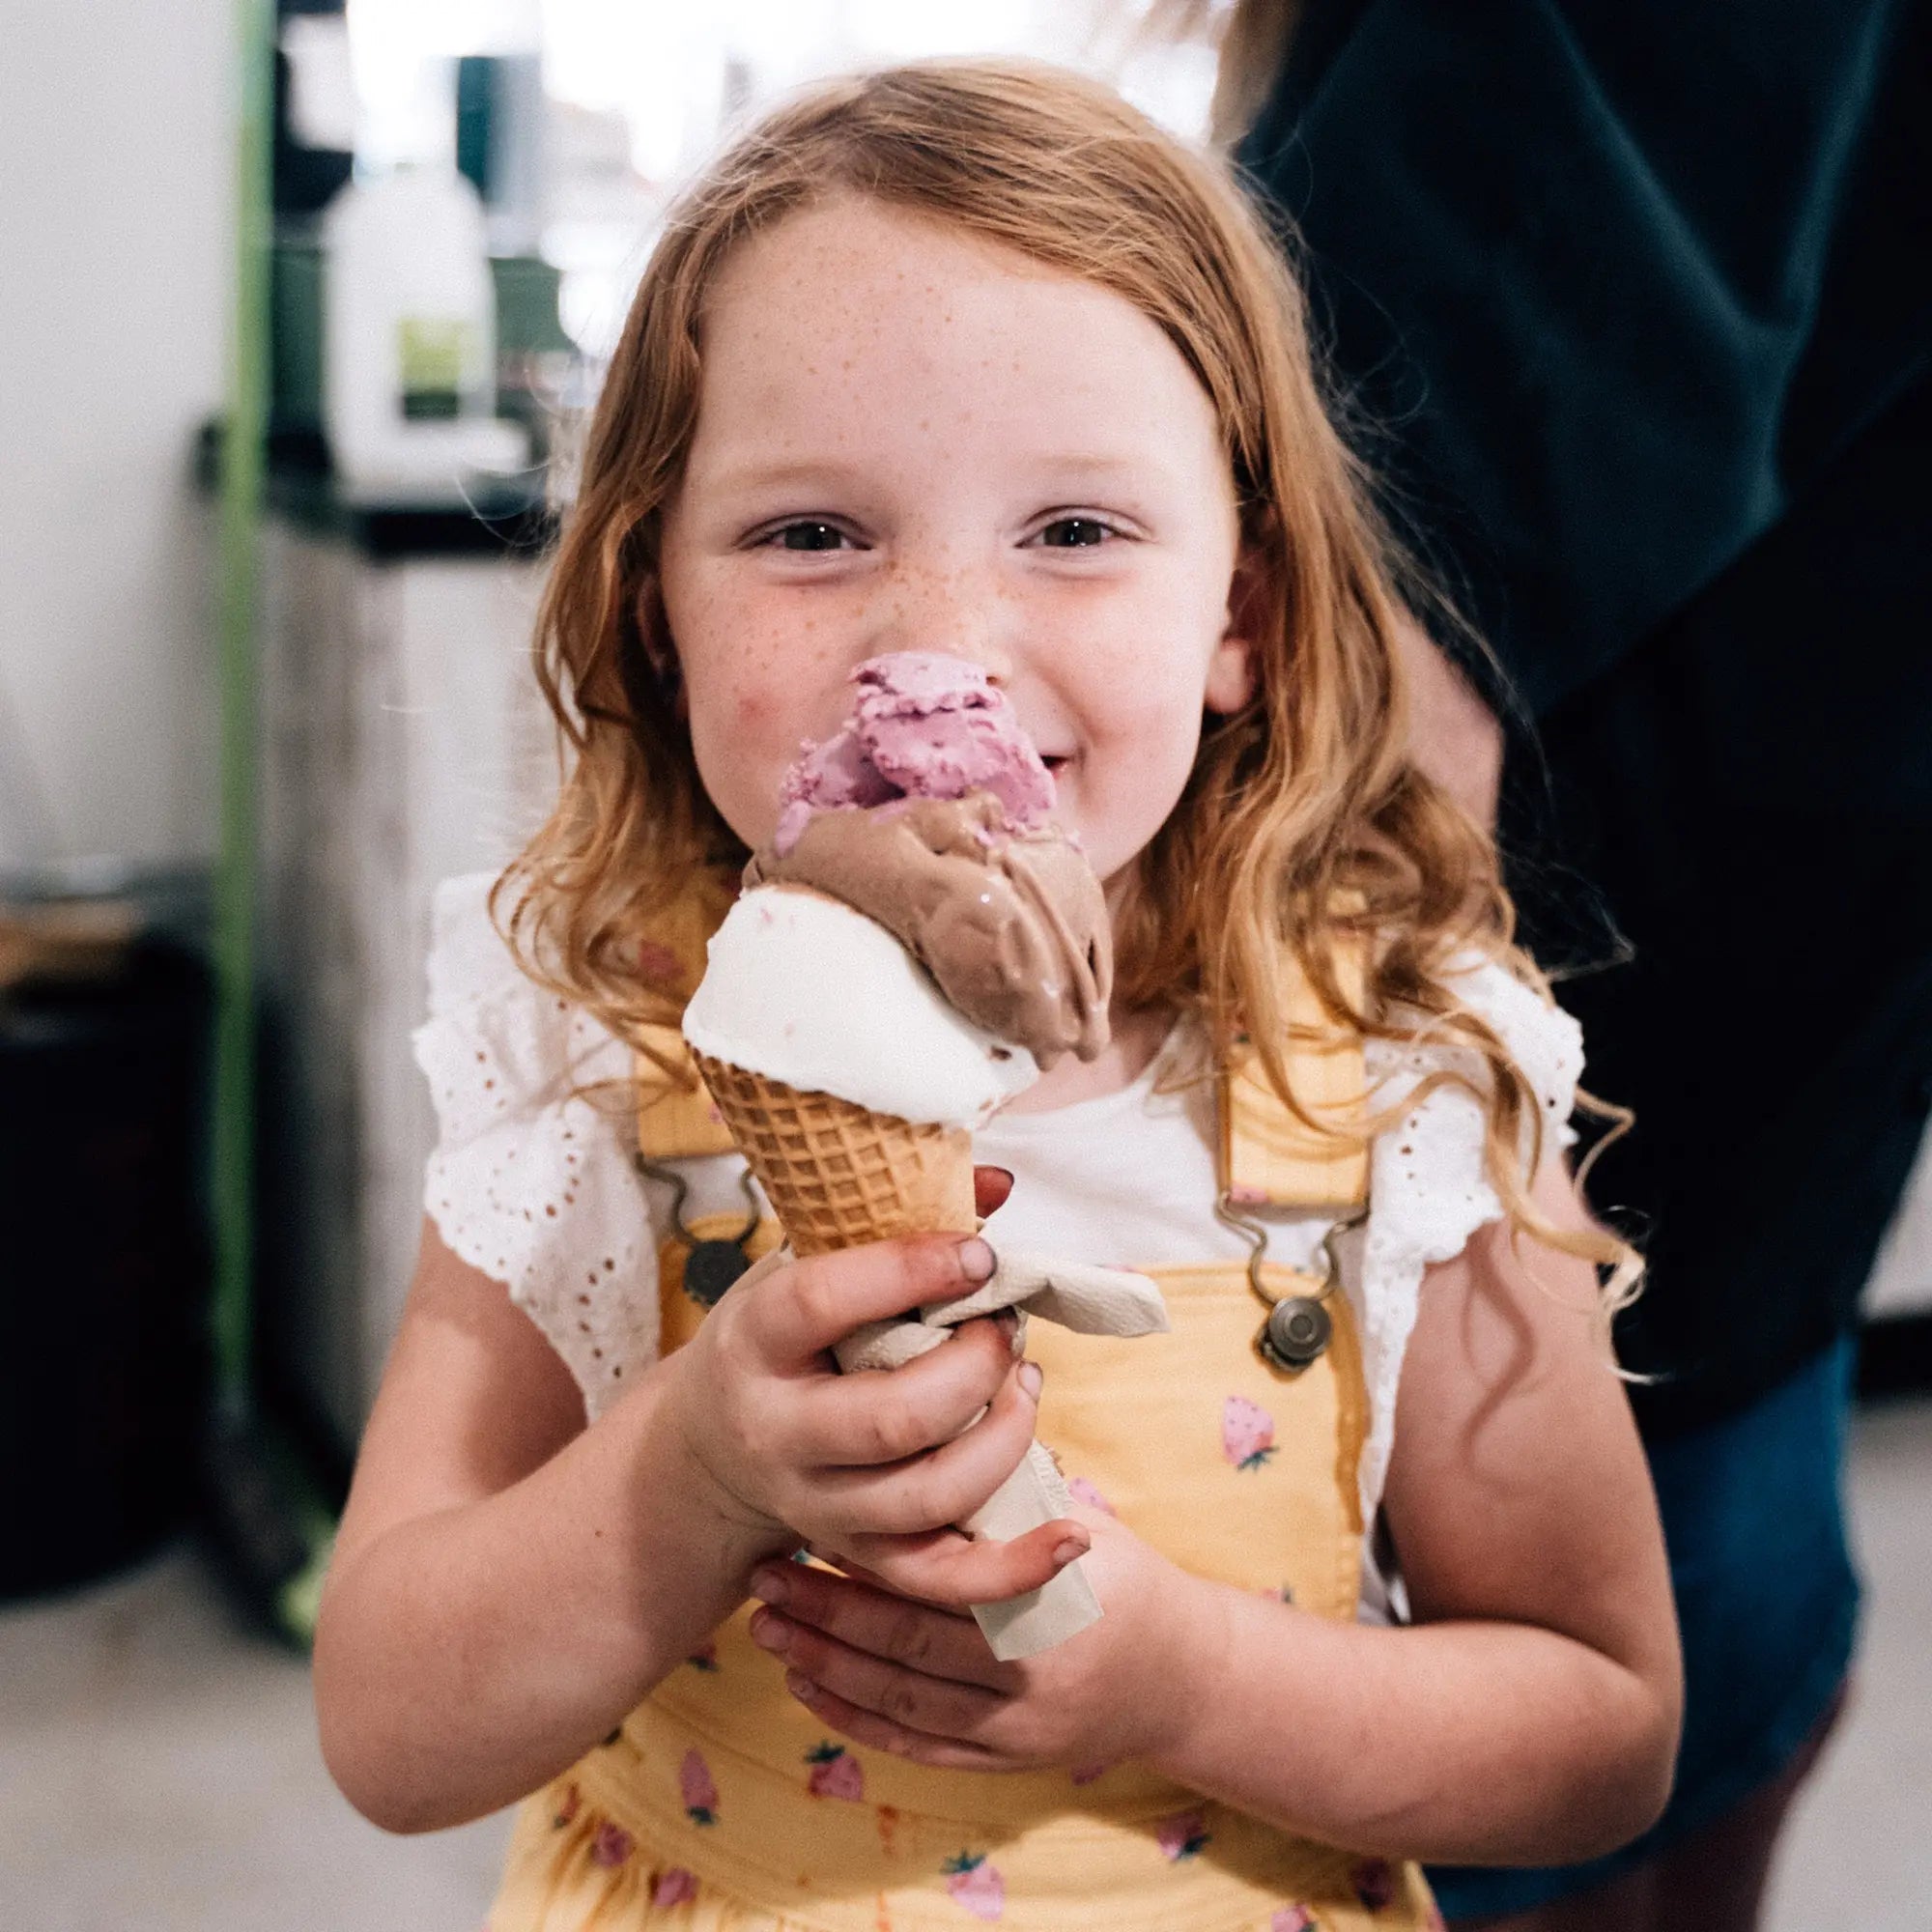 A young girl eating ice cream at the Market Hall at Harvest the Fleurieu.